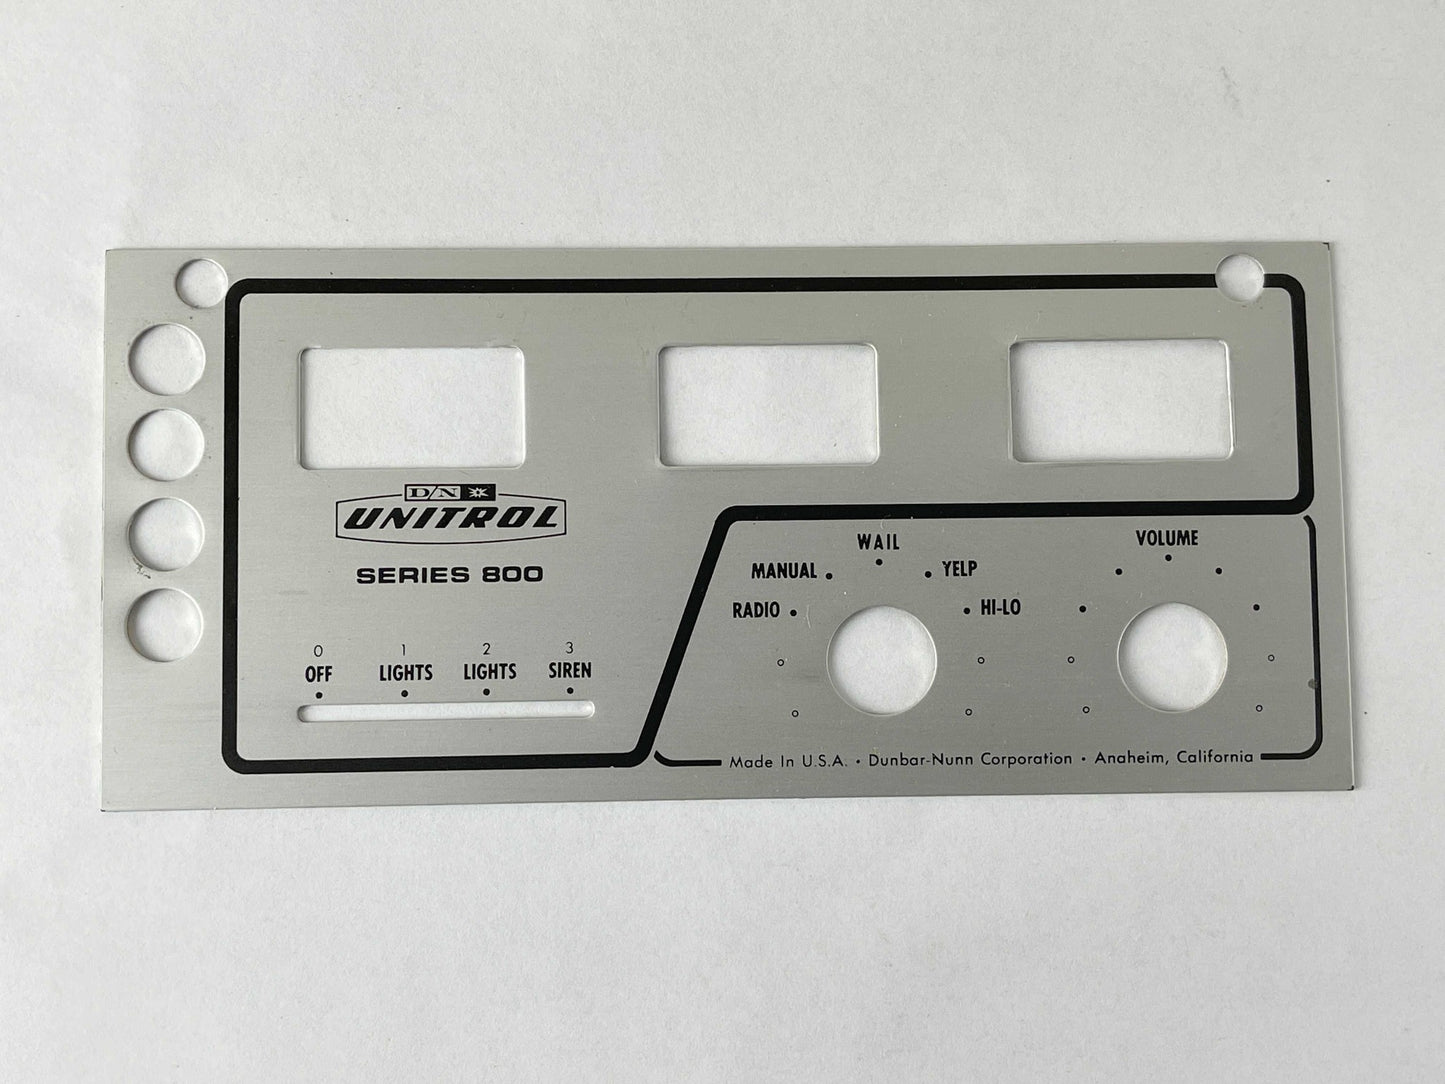 Unitrol Series 800 Siren Parts - Faceplate For Three Position Selector Switches